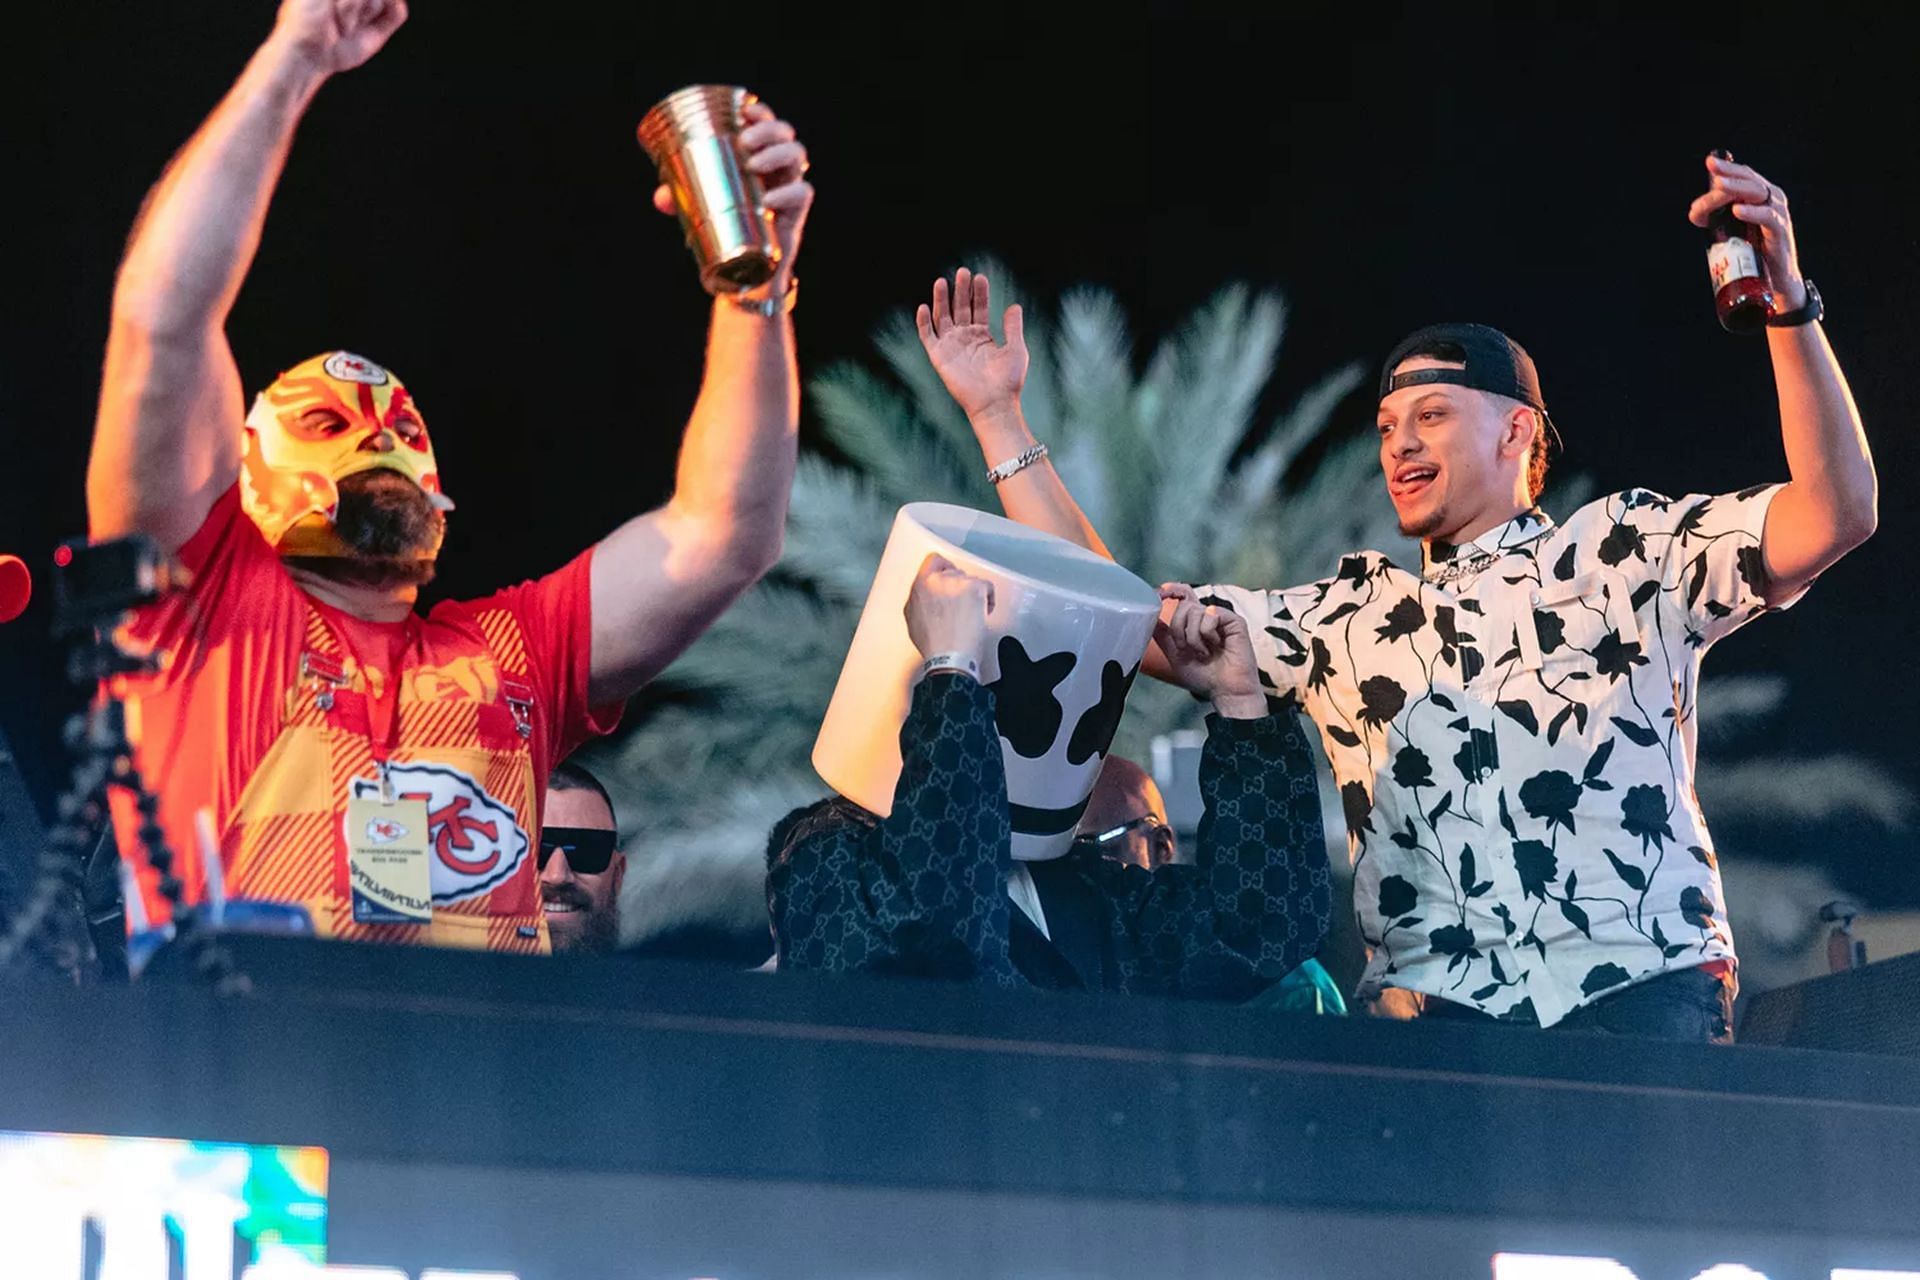 Patrick Mahomes get candid on Jason Kelce celebrating with Travis and Chiefs in Las Vegas (Pic Courtesy: People.com)